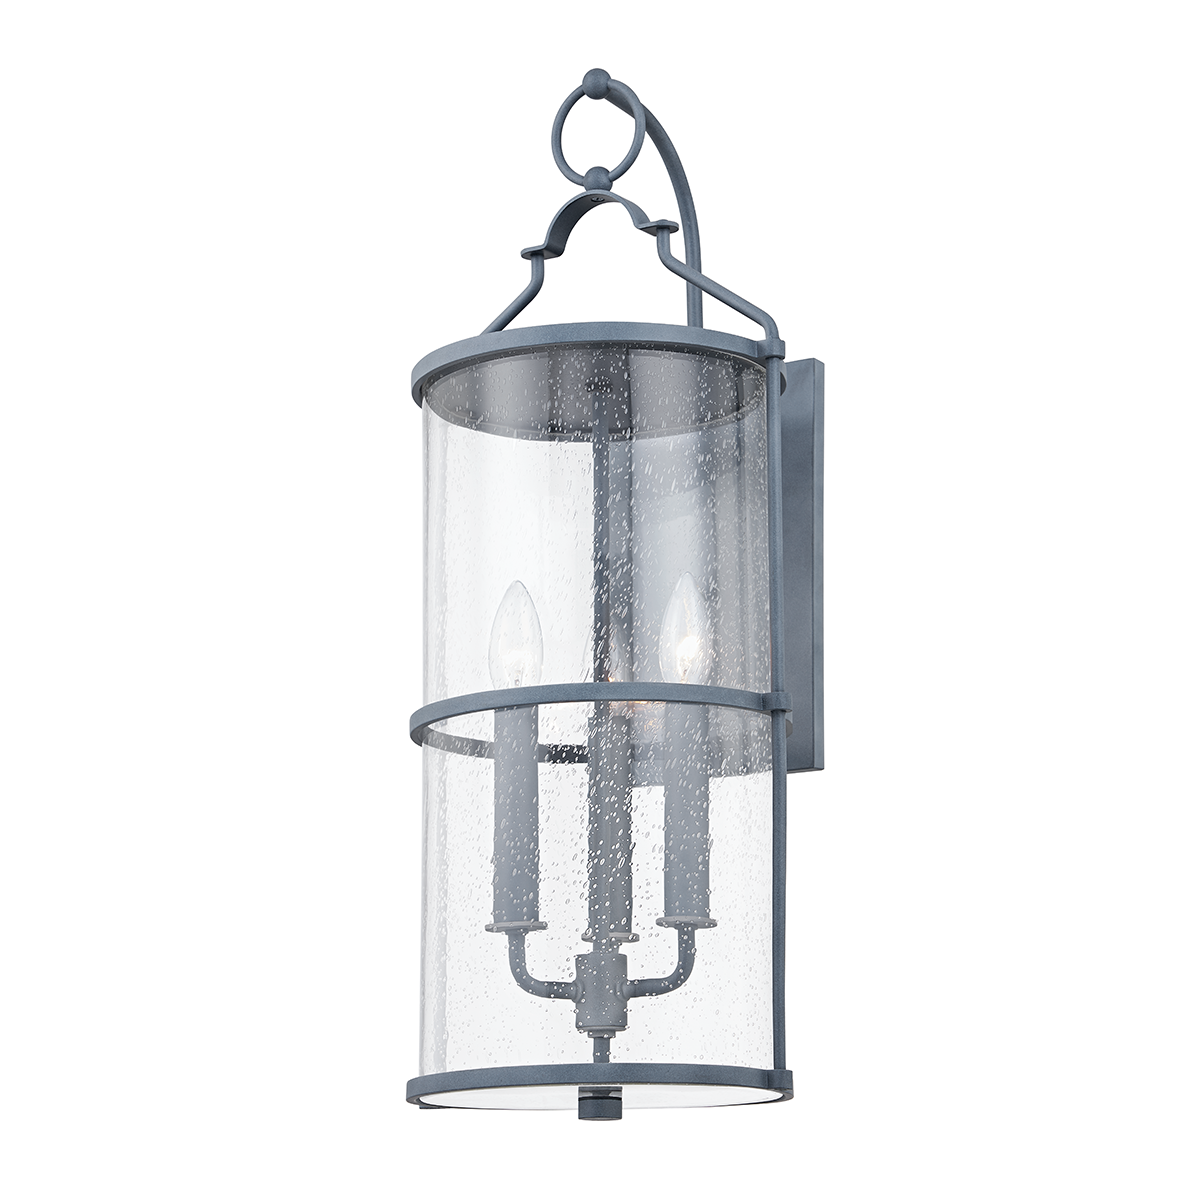 Troy BURBANK 3 LIGHT LARGE EXTERIOR WALL SCONCE B1313 Outdoor l Wall Troy Lighting   